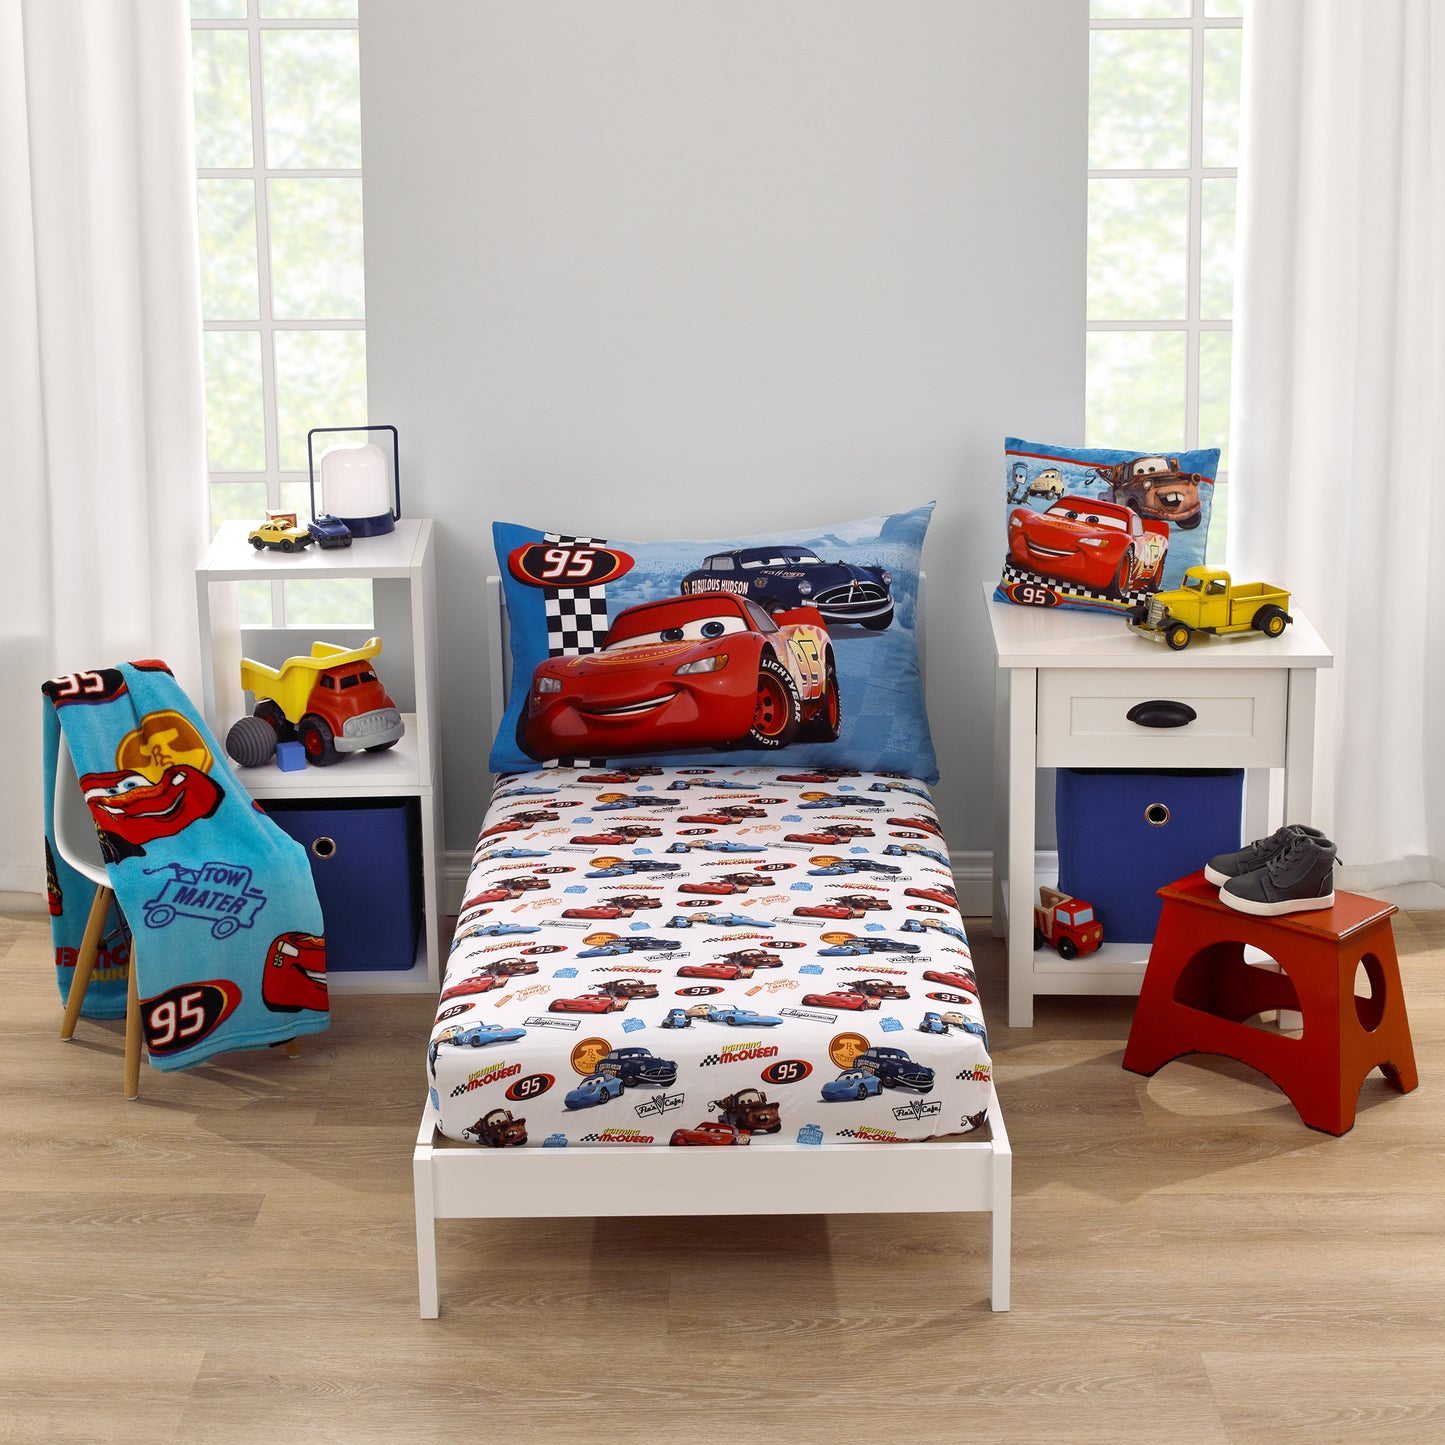 Disney Cars Radiator Springs White, Blue, and Red Lightning McQueen and Tow-Mater 2 Piece Toddler Sheet Set - Fitted Bottom Sheet and Reversible Pillowcase